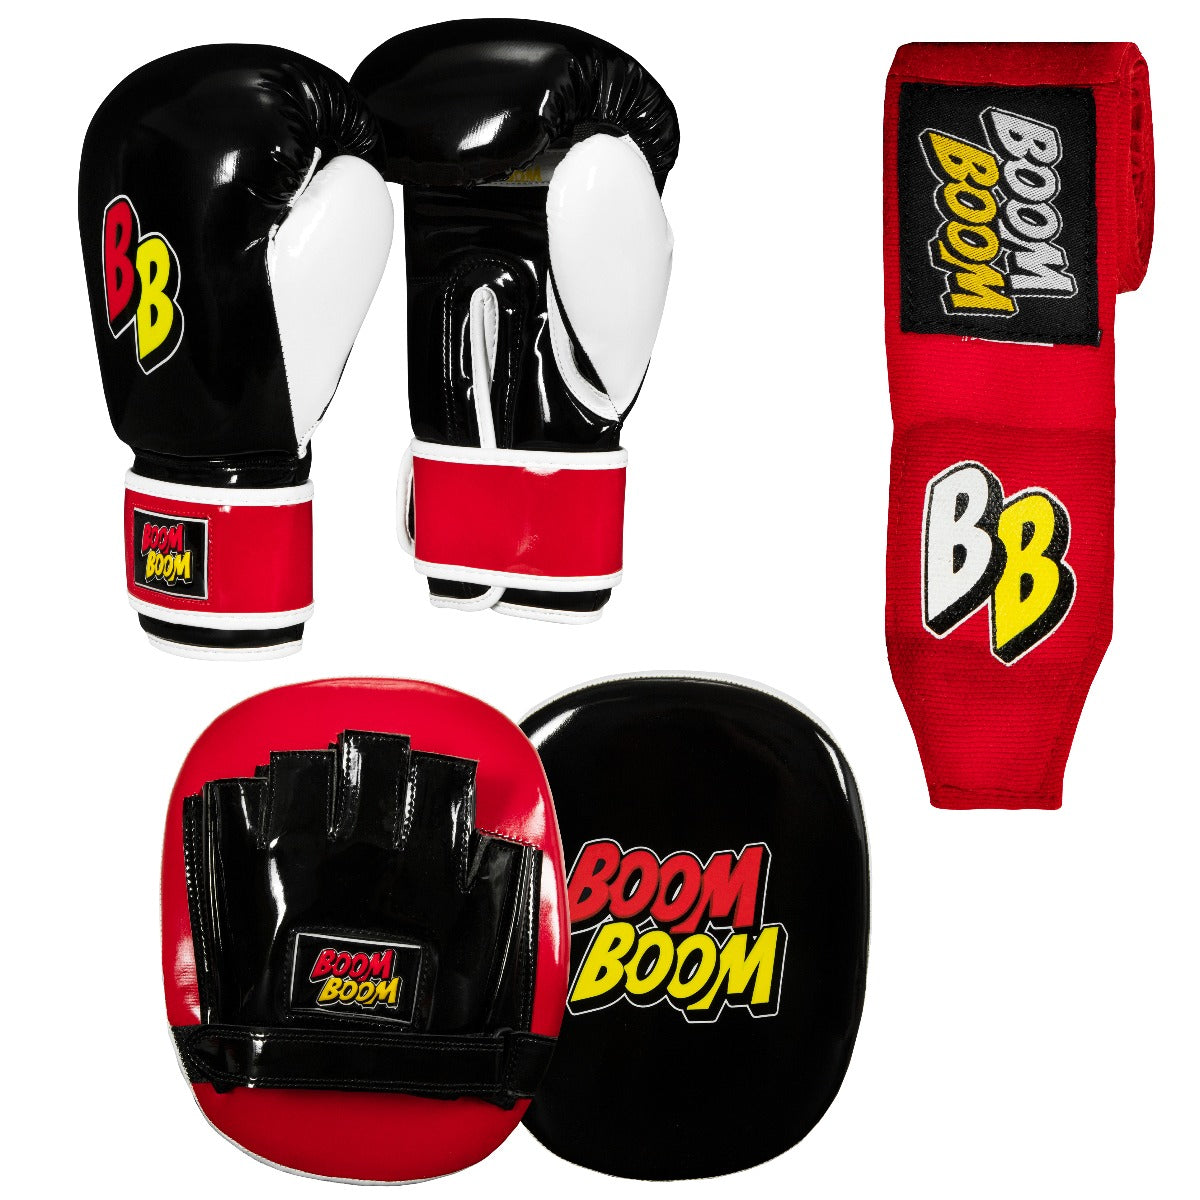 Black/White/Red Title Boxing Boom Boom Bomber Training Boxing Gloves 